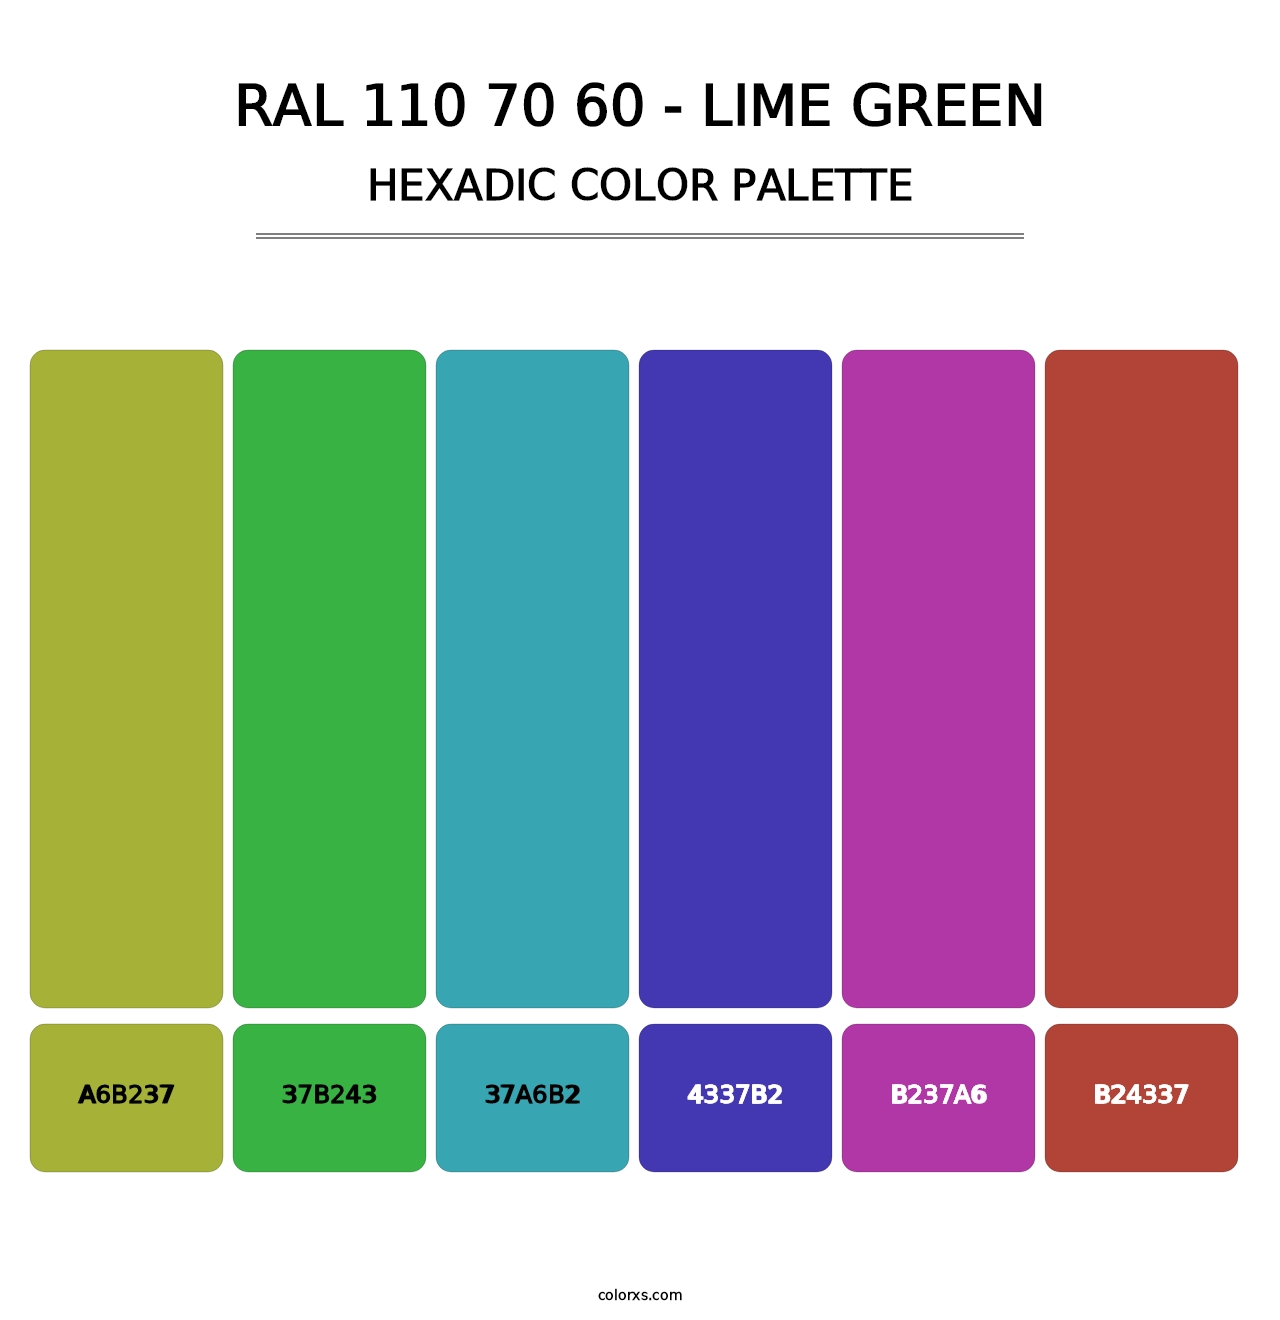 RAL 110 70 60 - Lime Green - Hexadic Color Palette